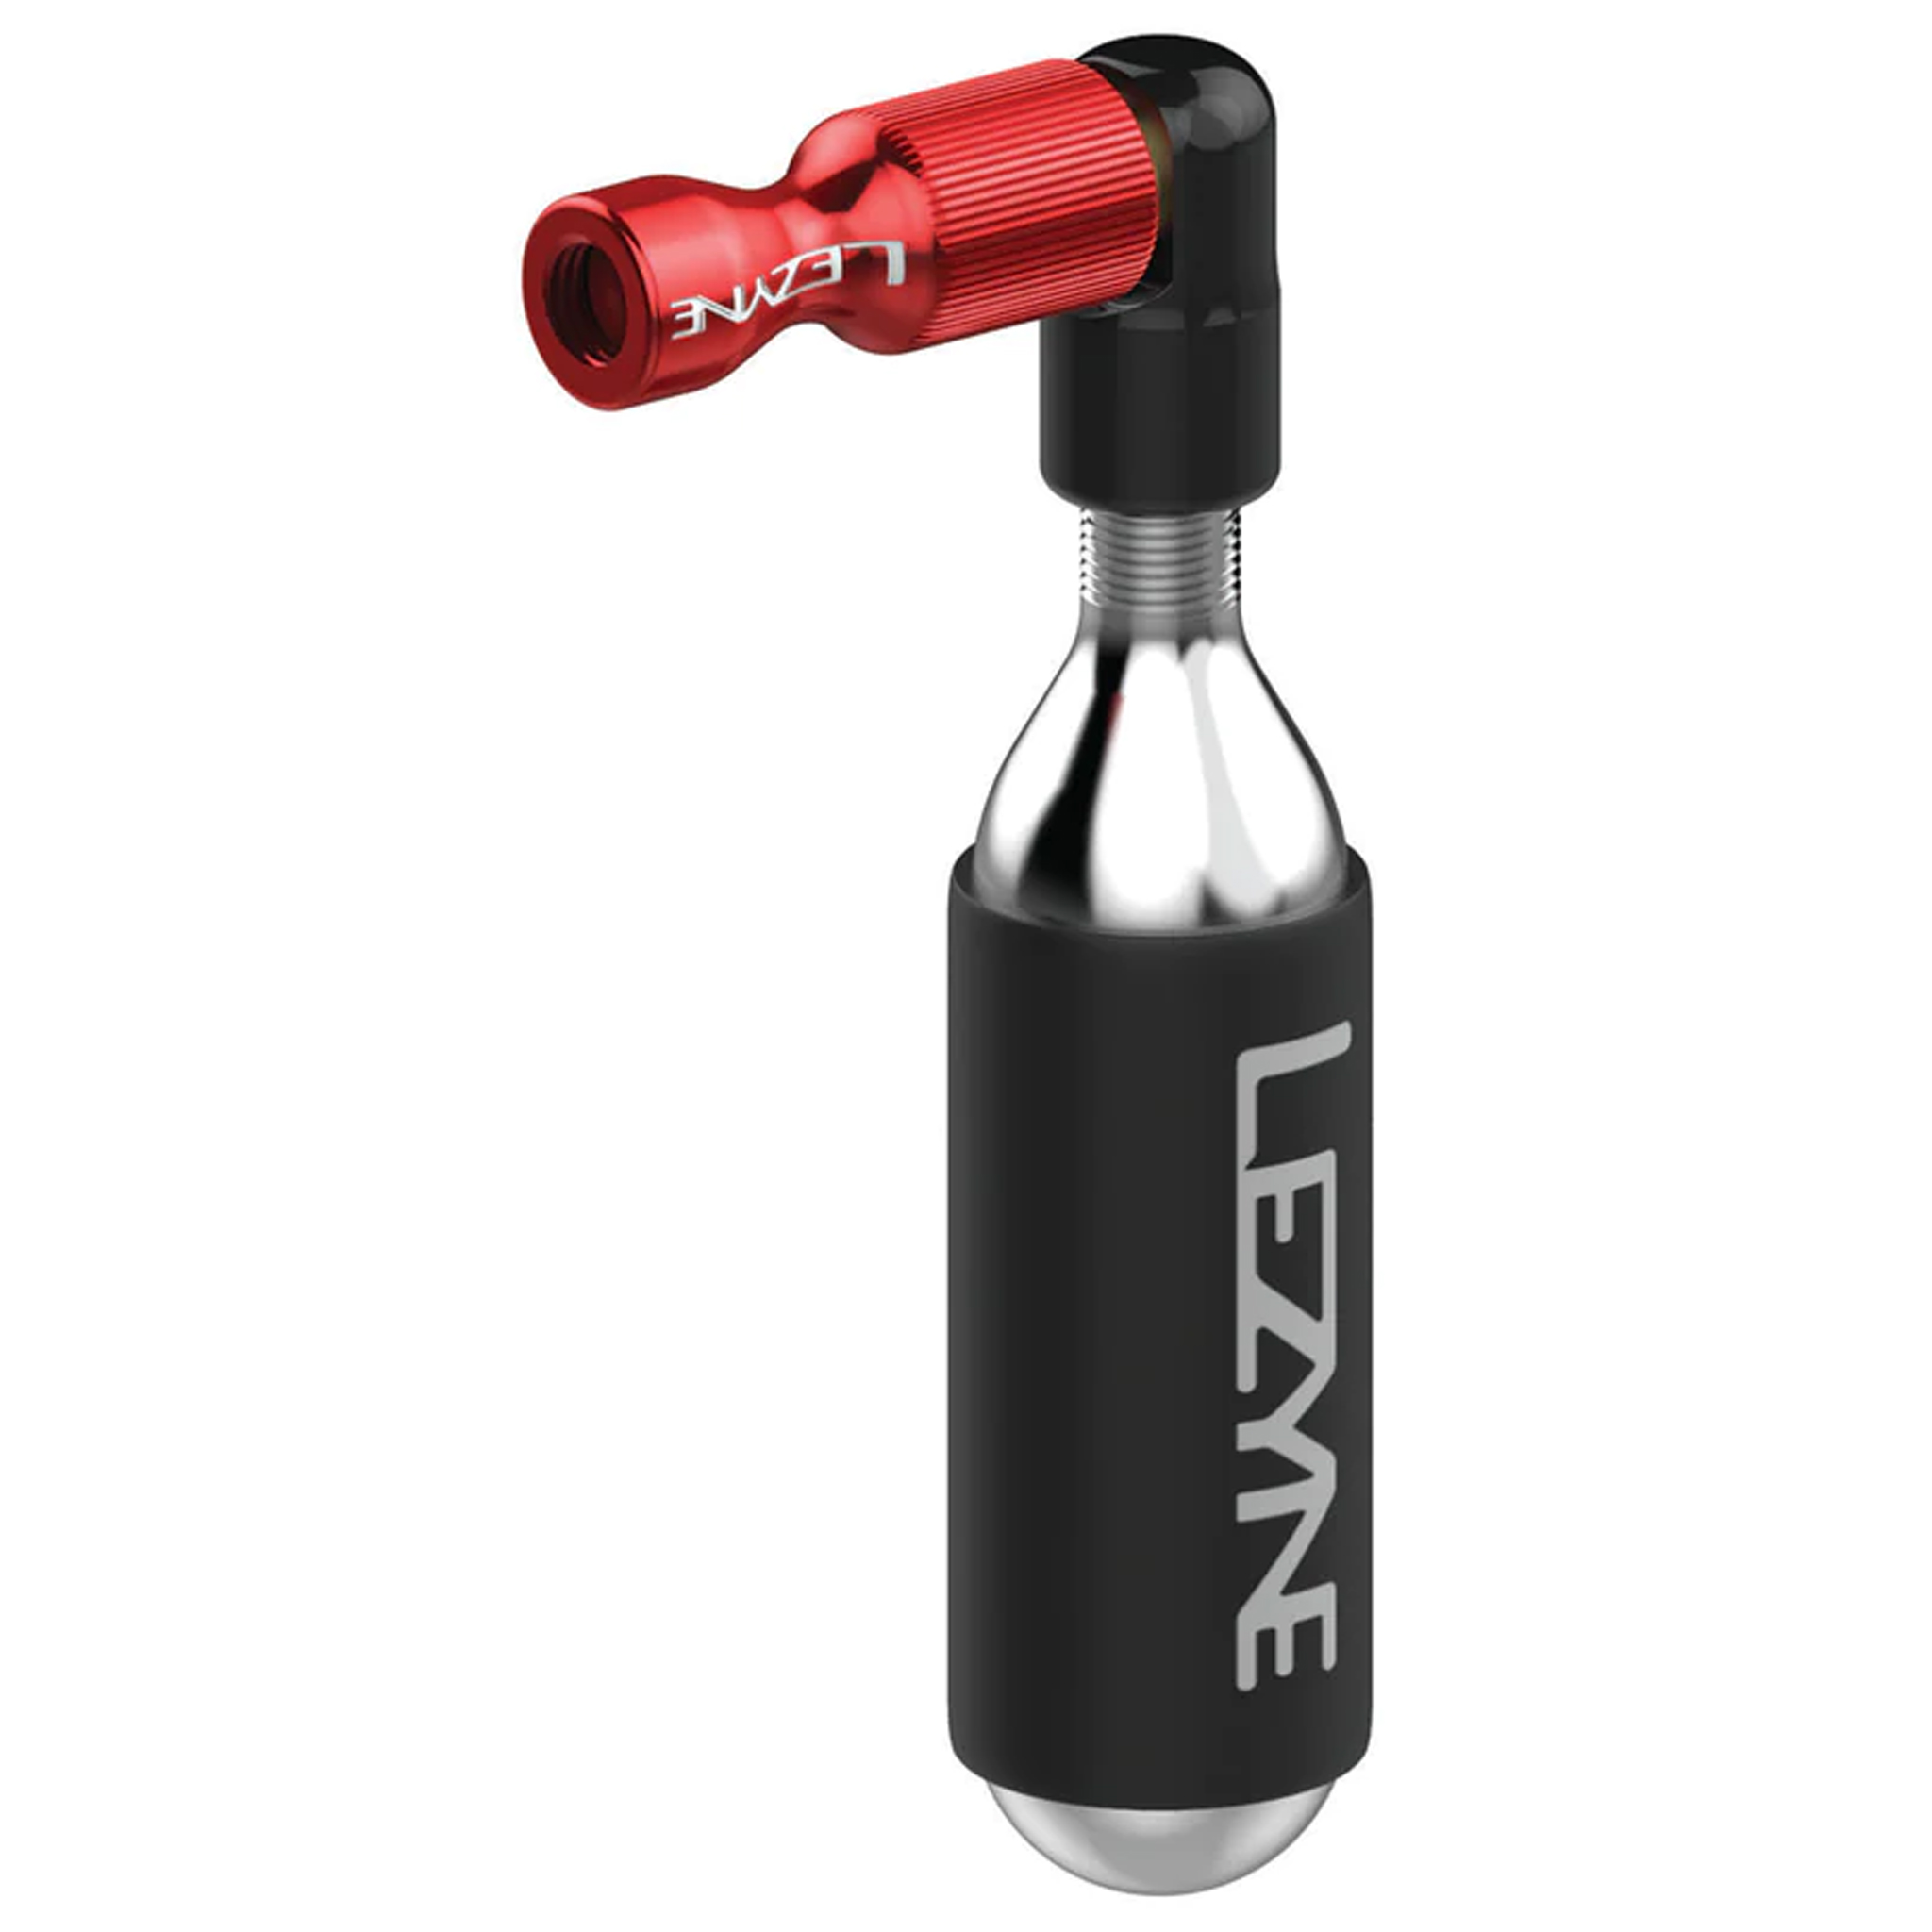 Lezyne Trigger Drive CO2 Inflator, Red